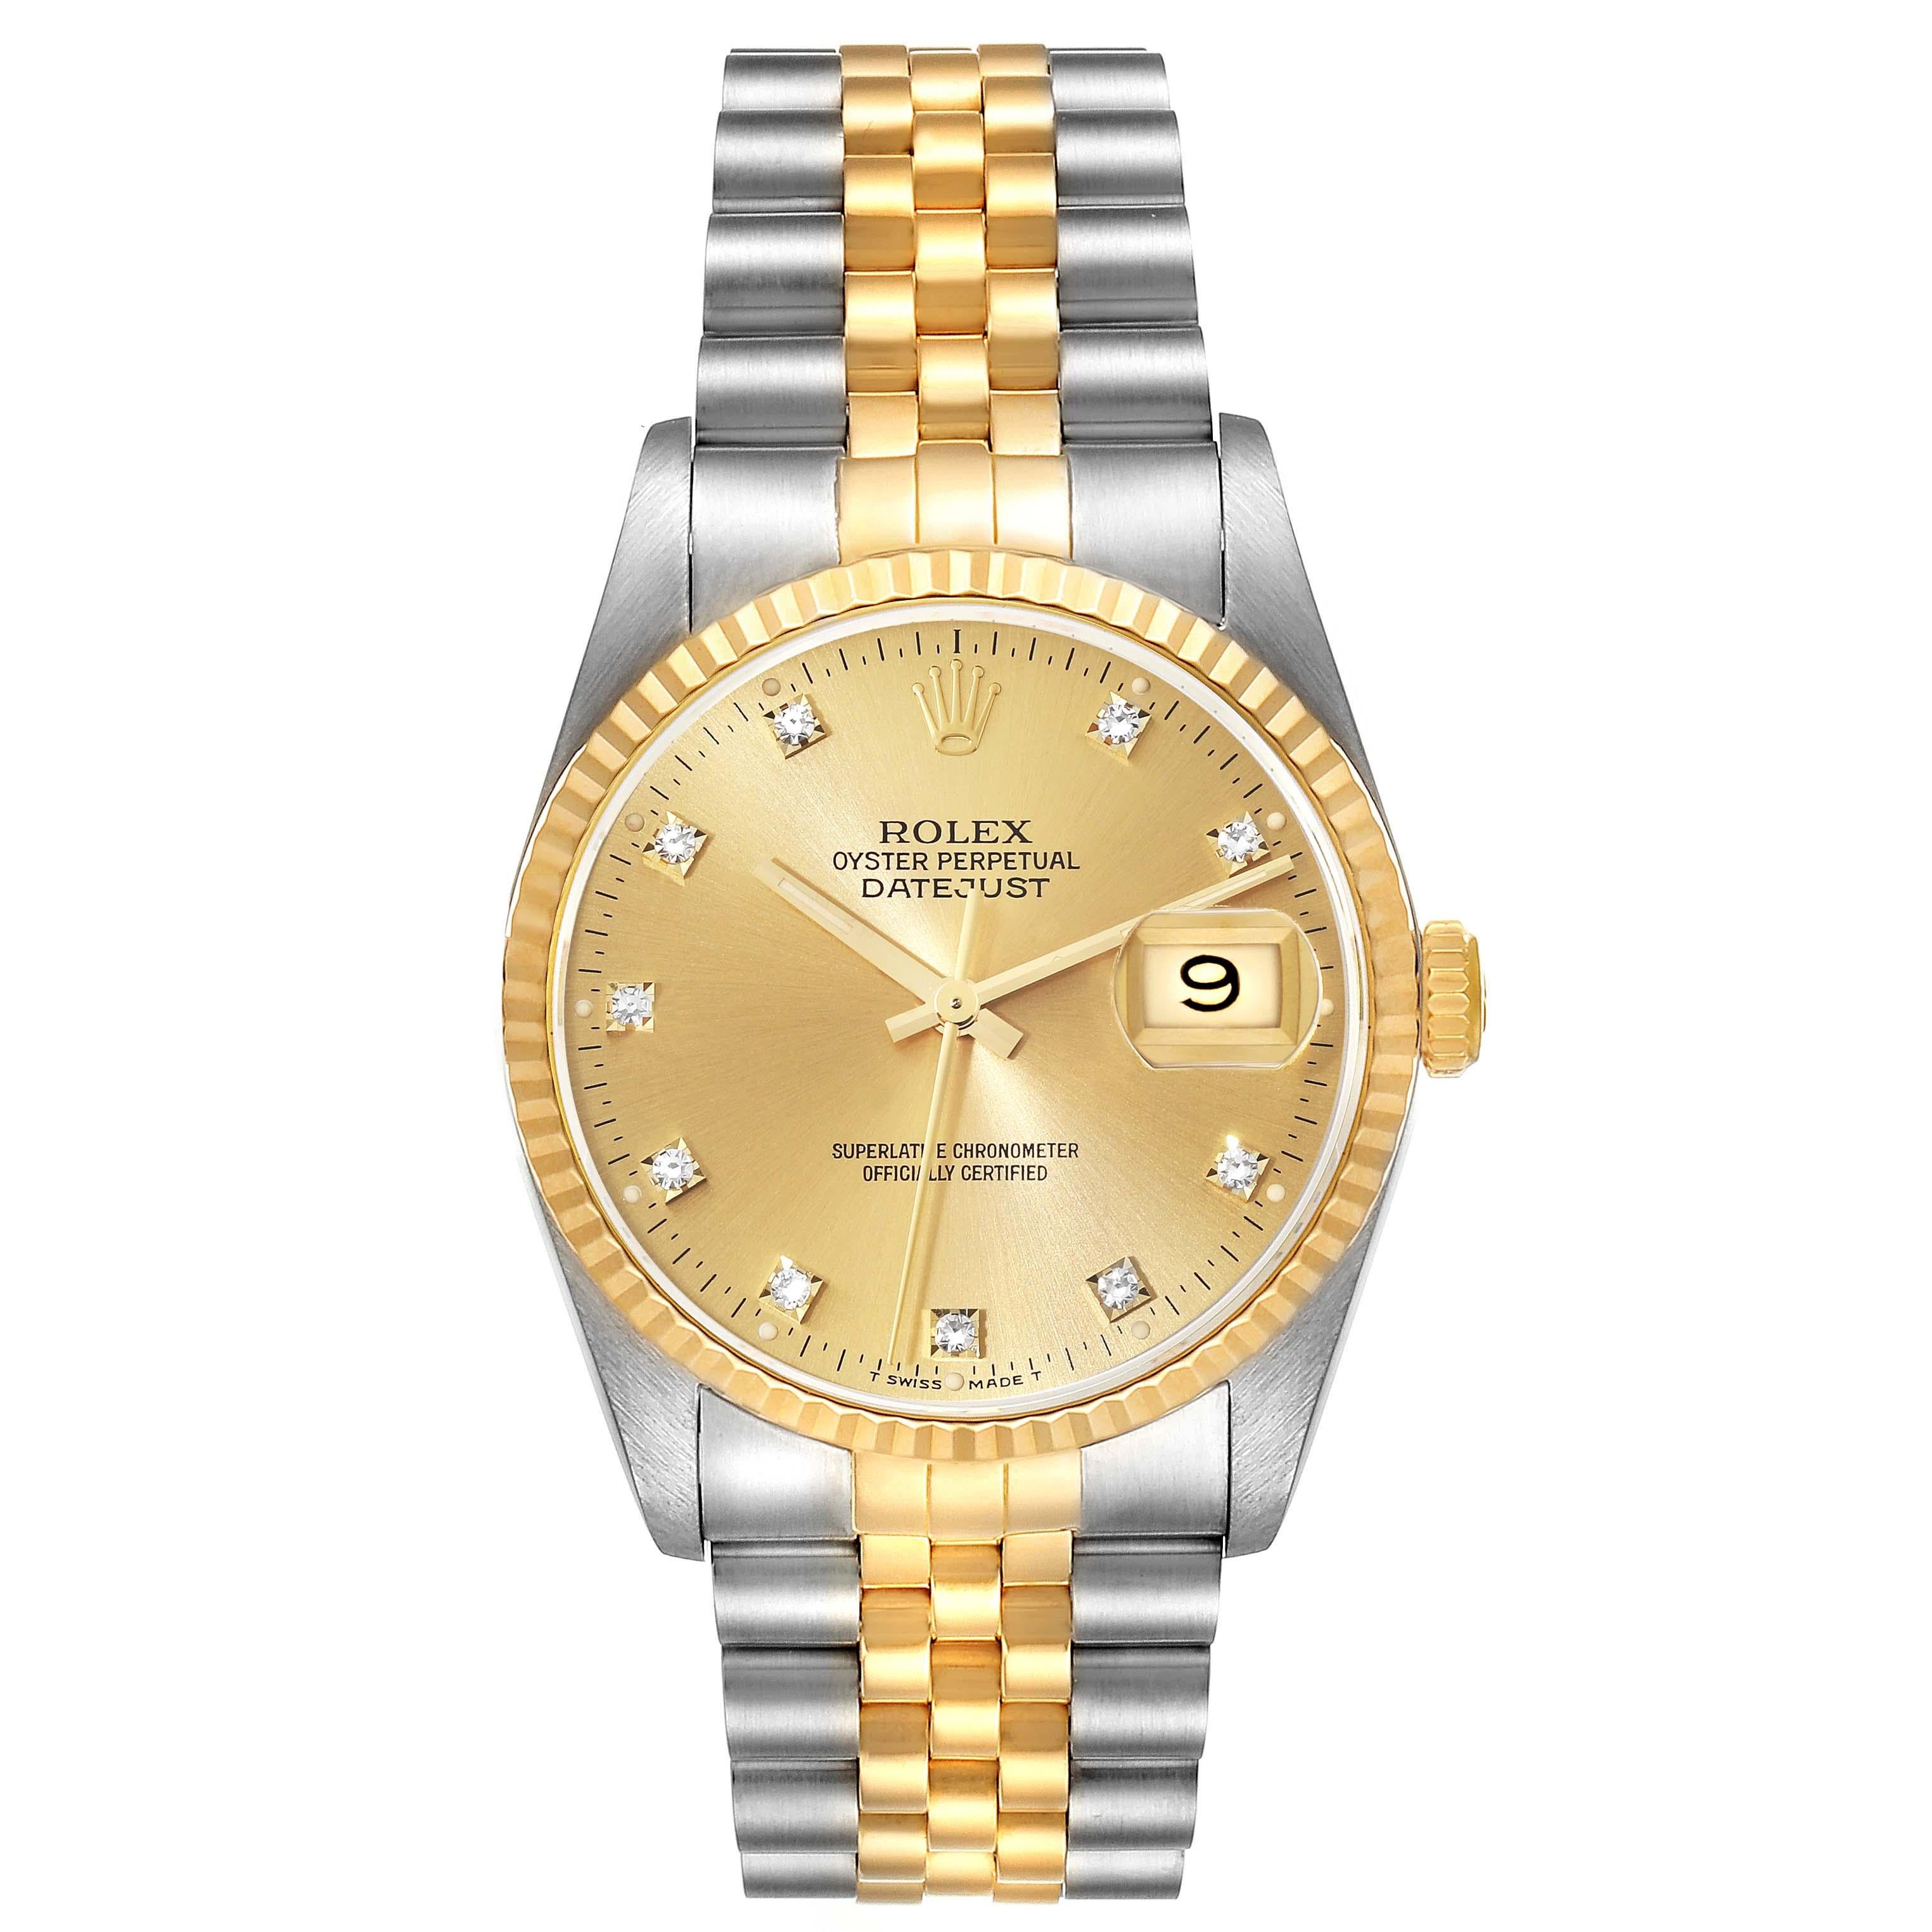 Rolex Datejust Champagne Diamond Dial Steel Yellow Gold Mens Watch 16233 For Sale 6